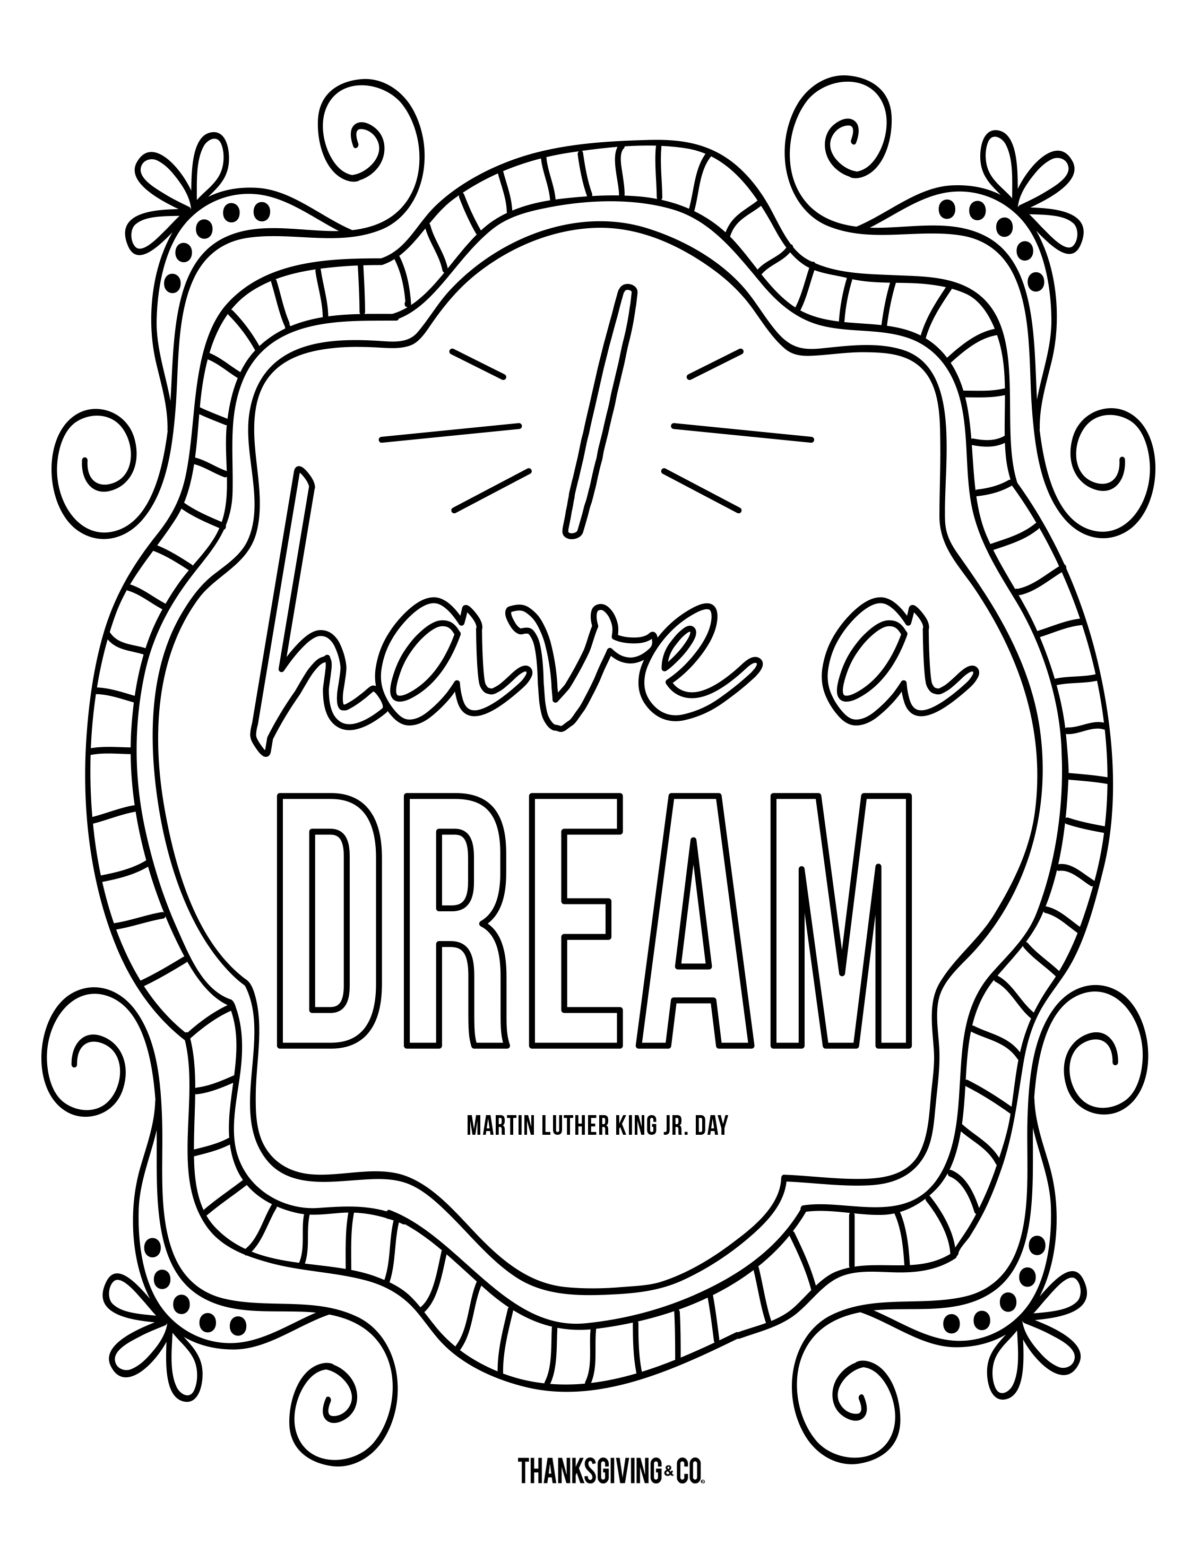 share-these-fun-martin-luther-king-jr-coloring-pages-with-your